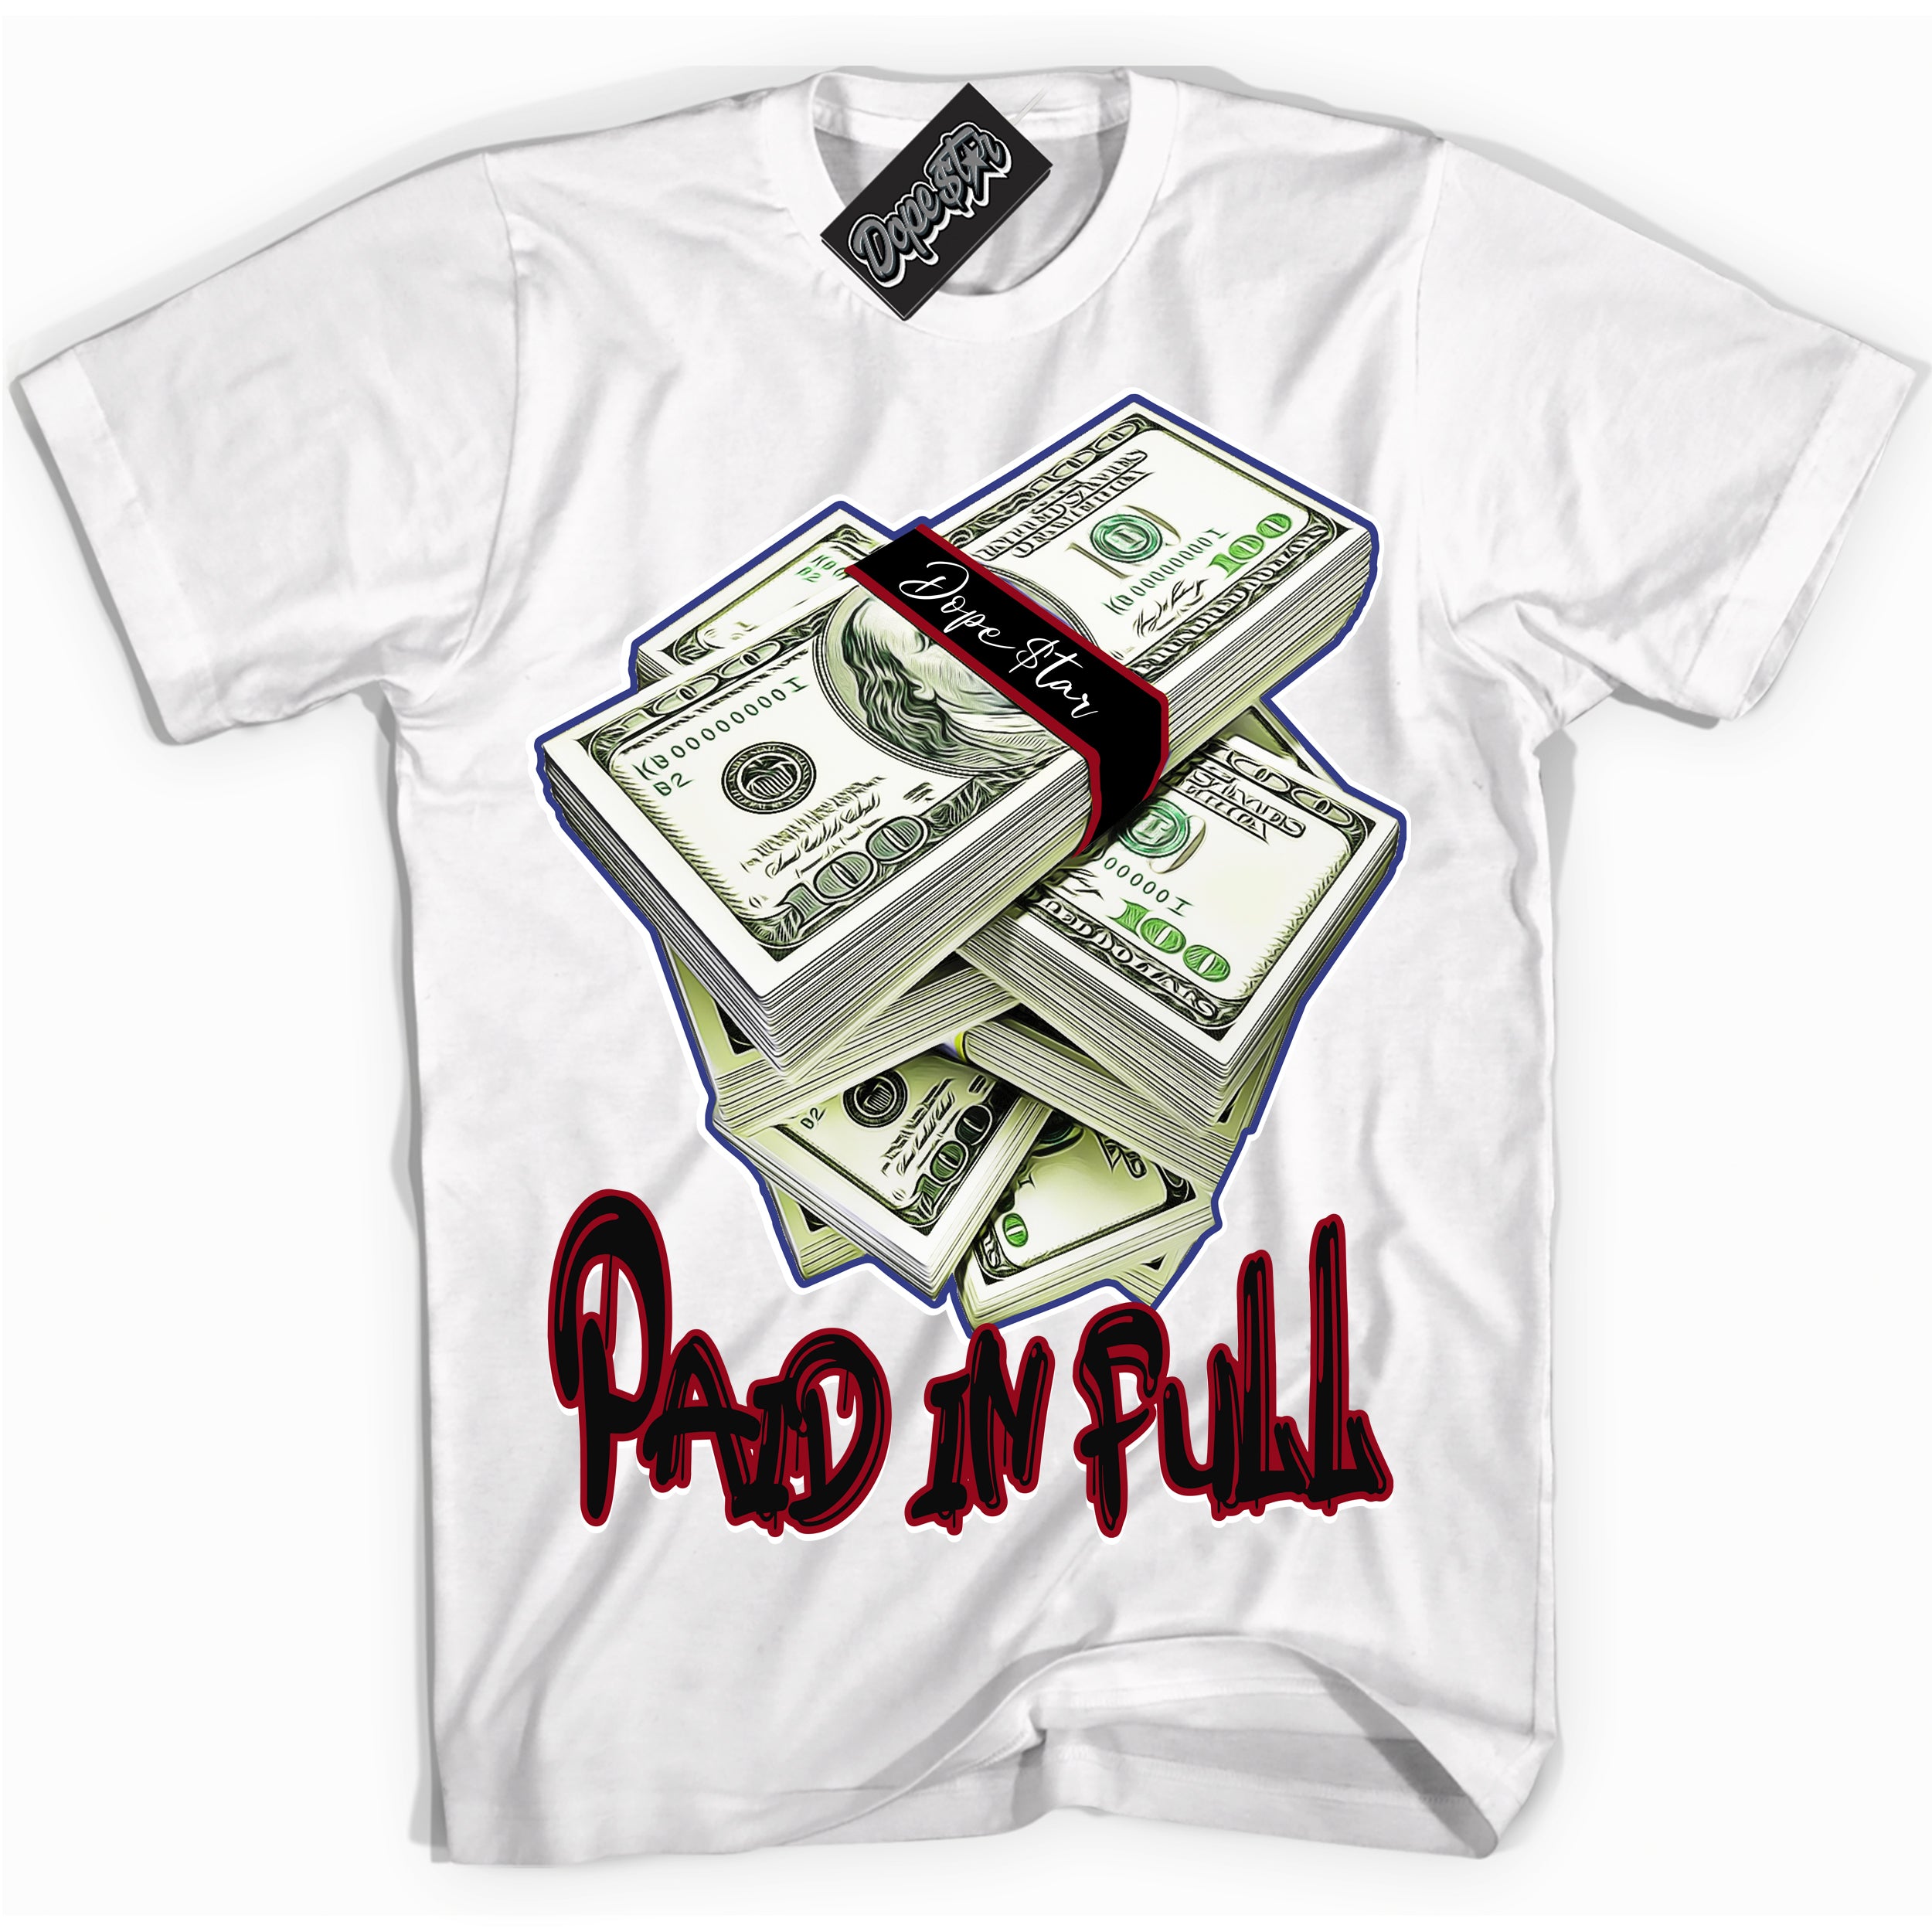 Cool White Shirt with “ Paid In Full ” design that perfectly matches Playoffs 8s Sneakers.